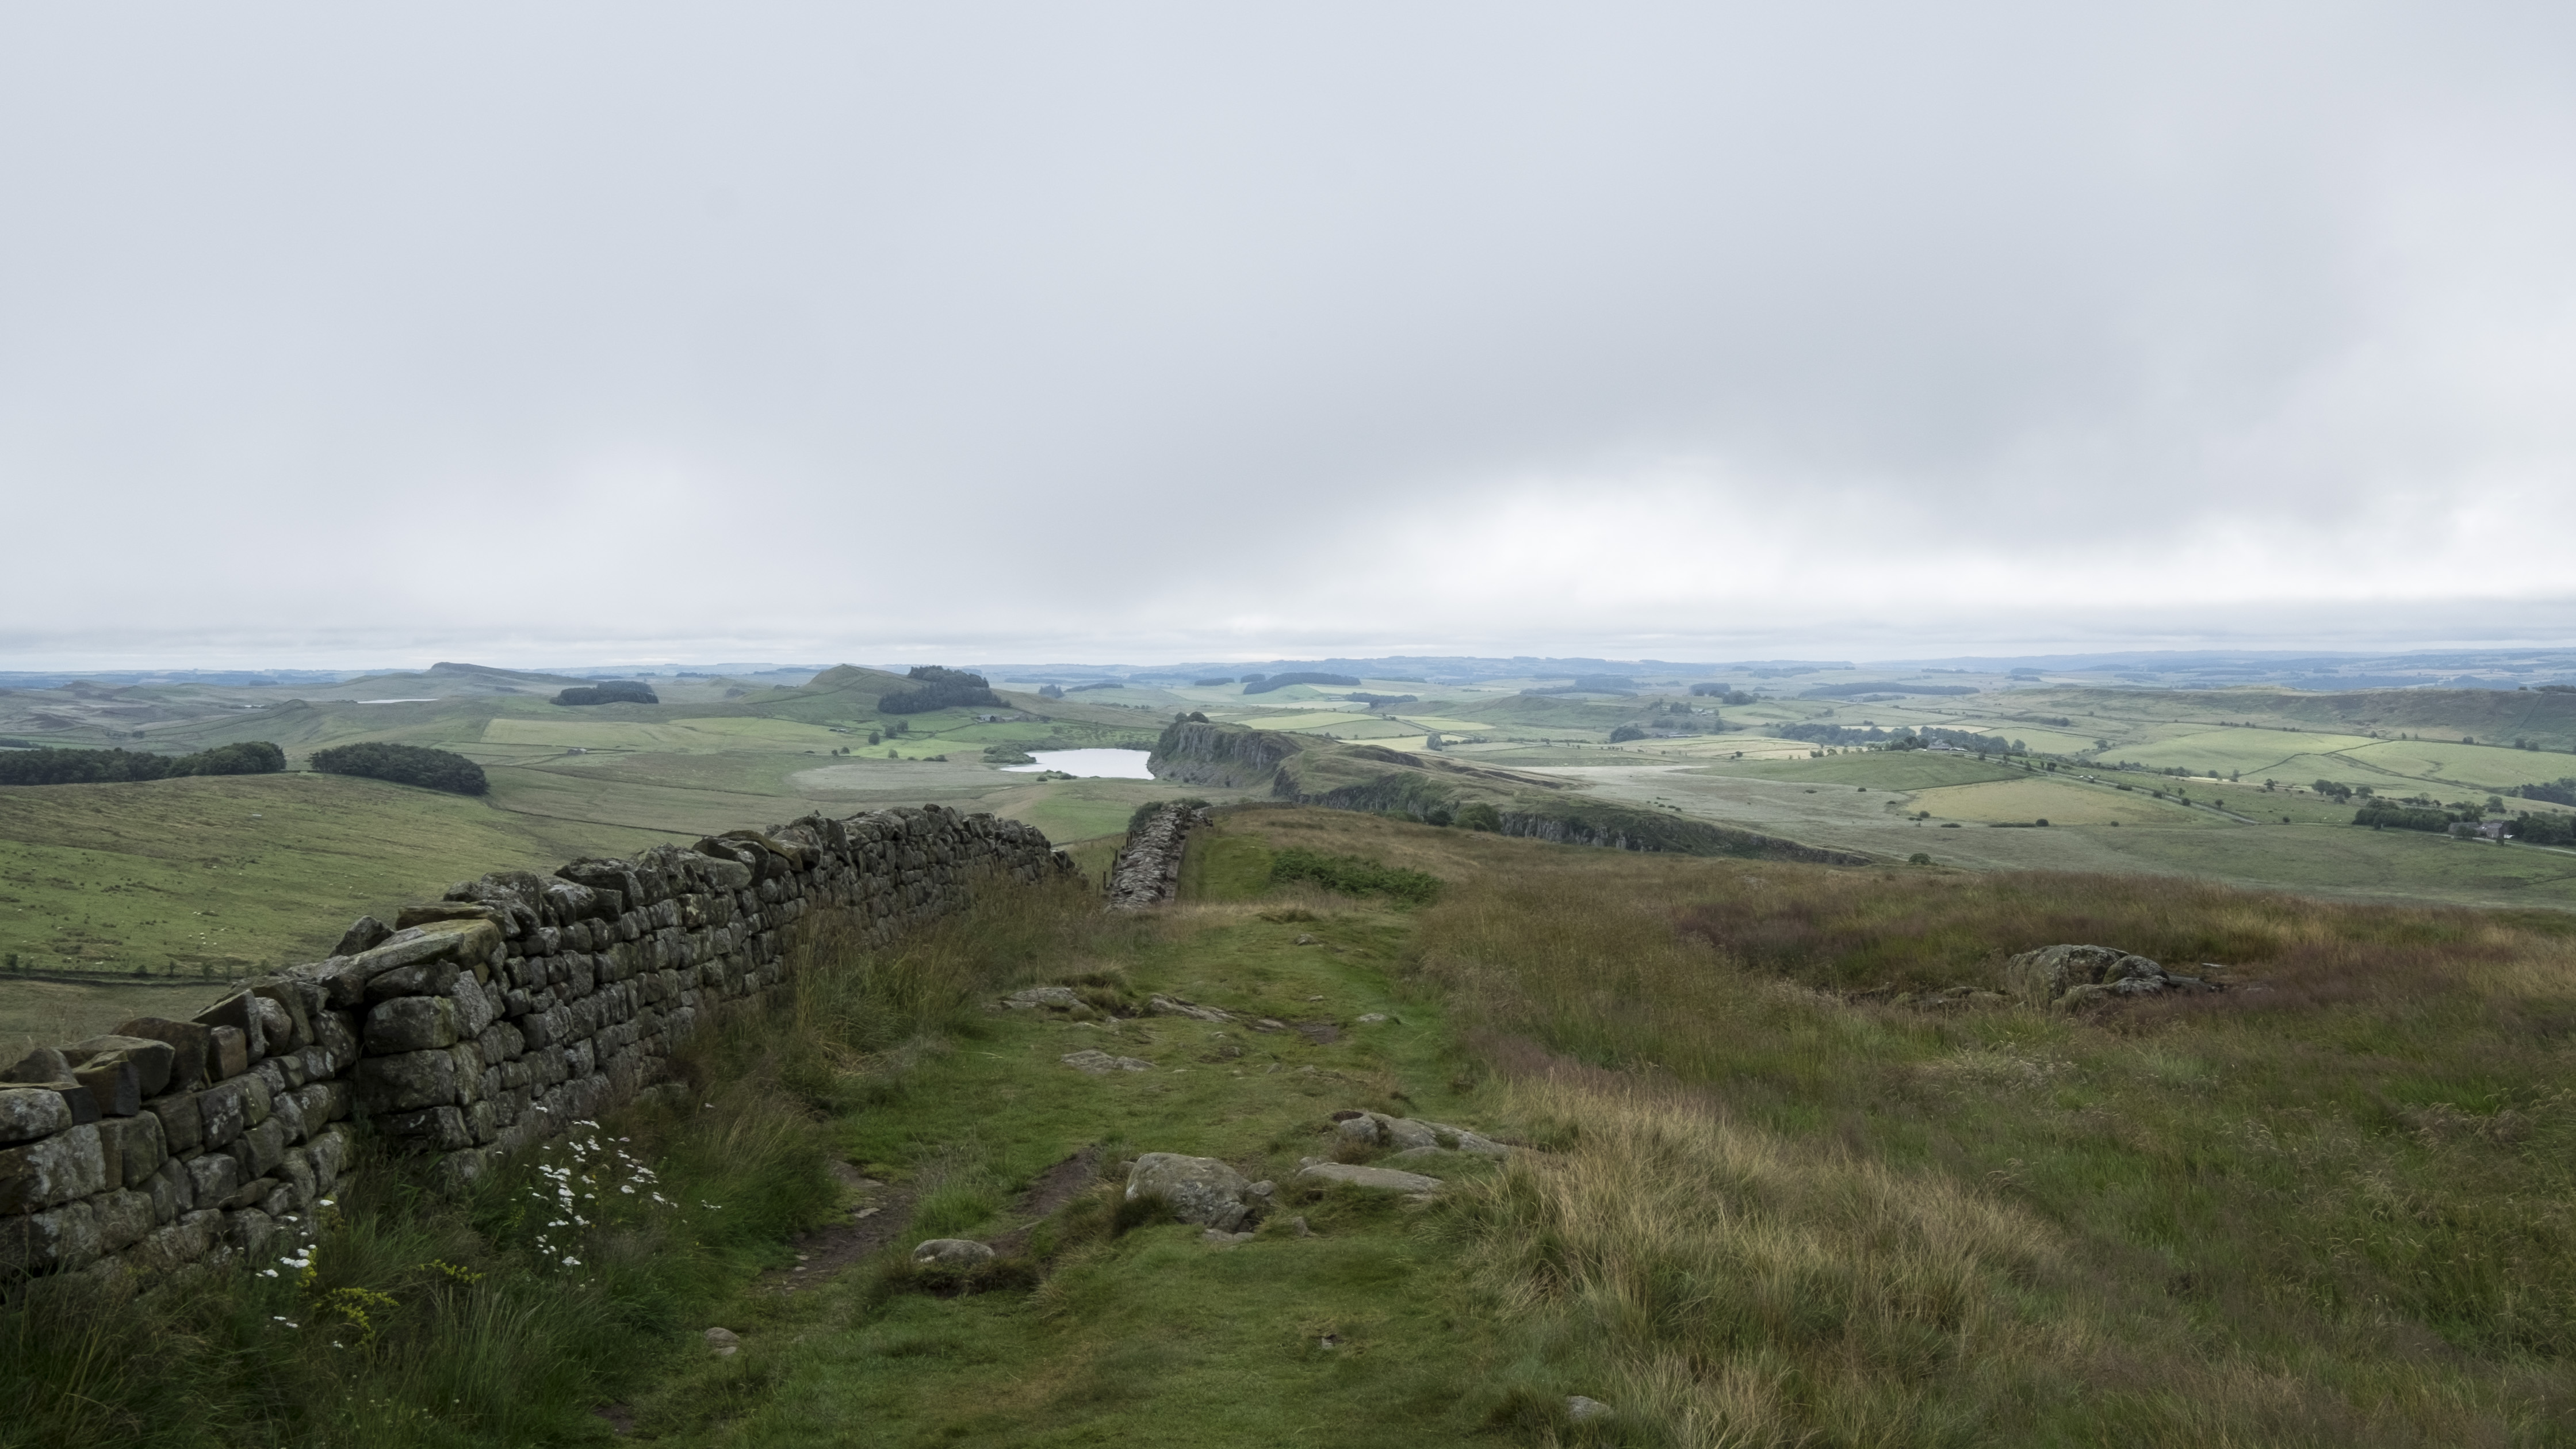 Hadrian's Wall in England's north is nearly 2000 years old. Image: Lucas Stephens